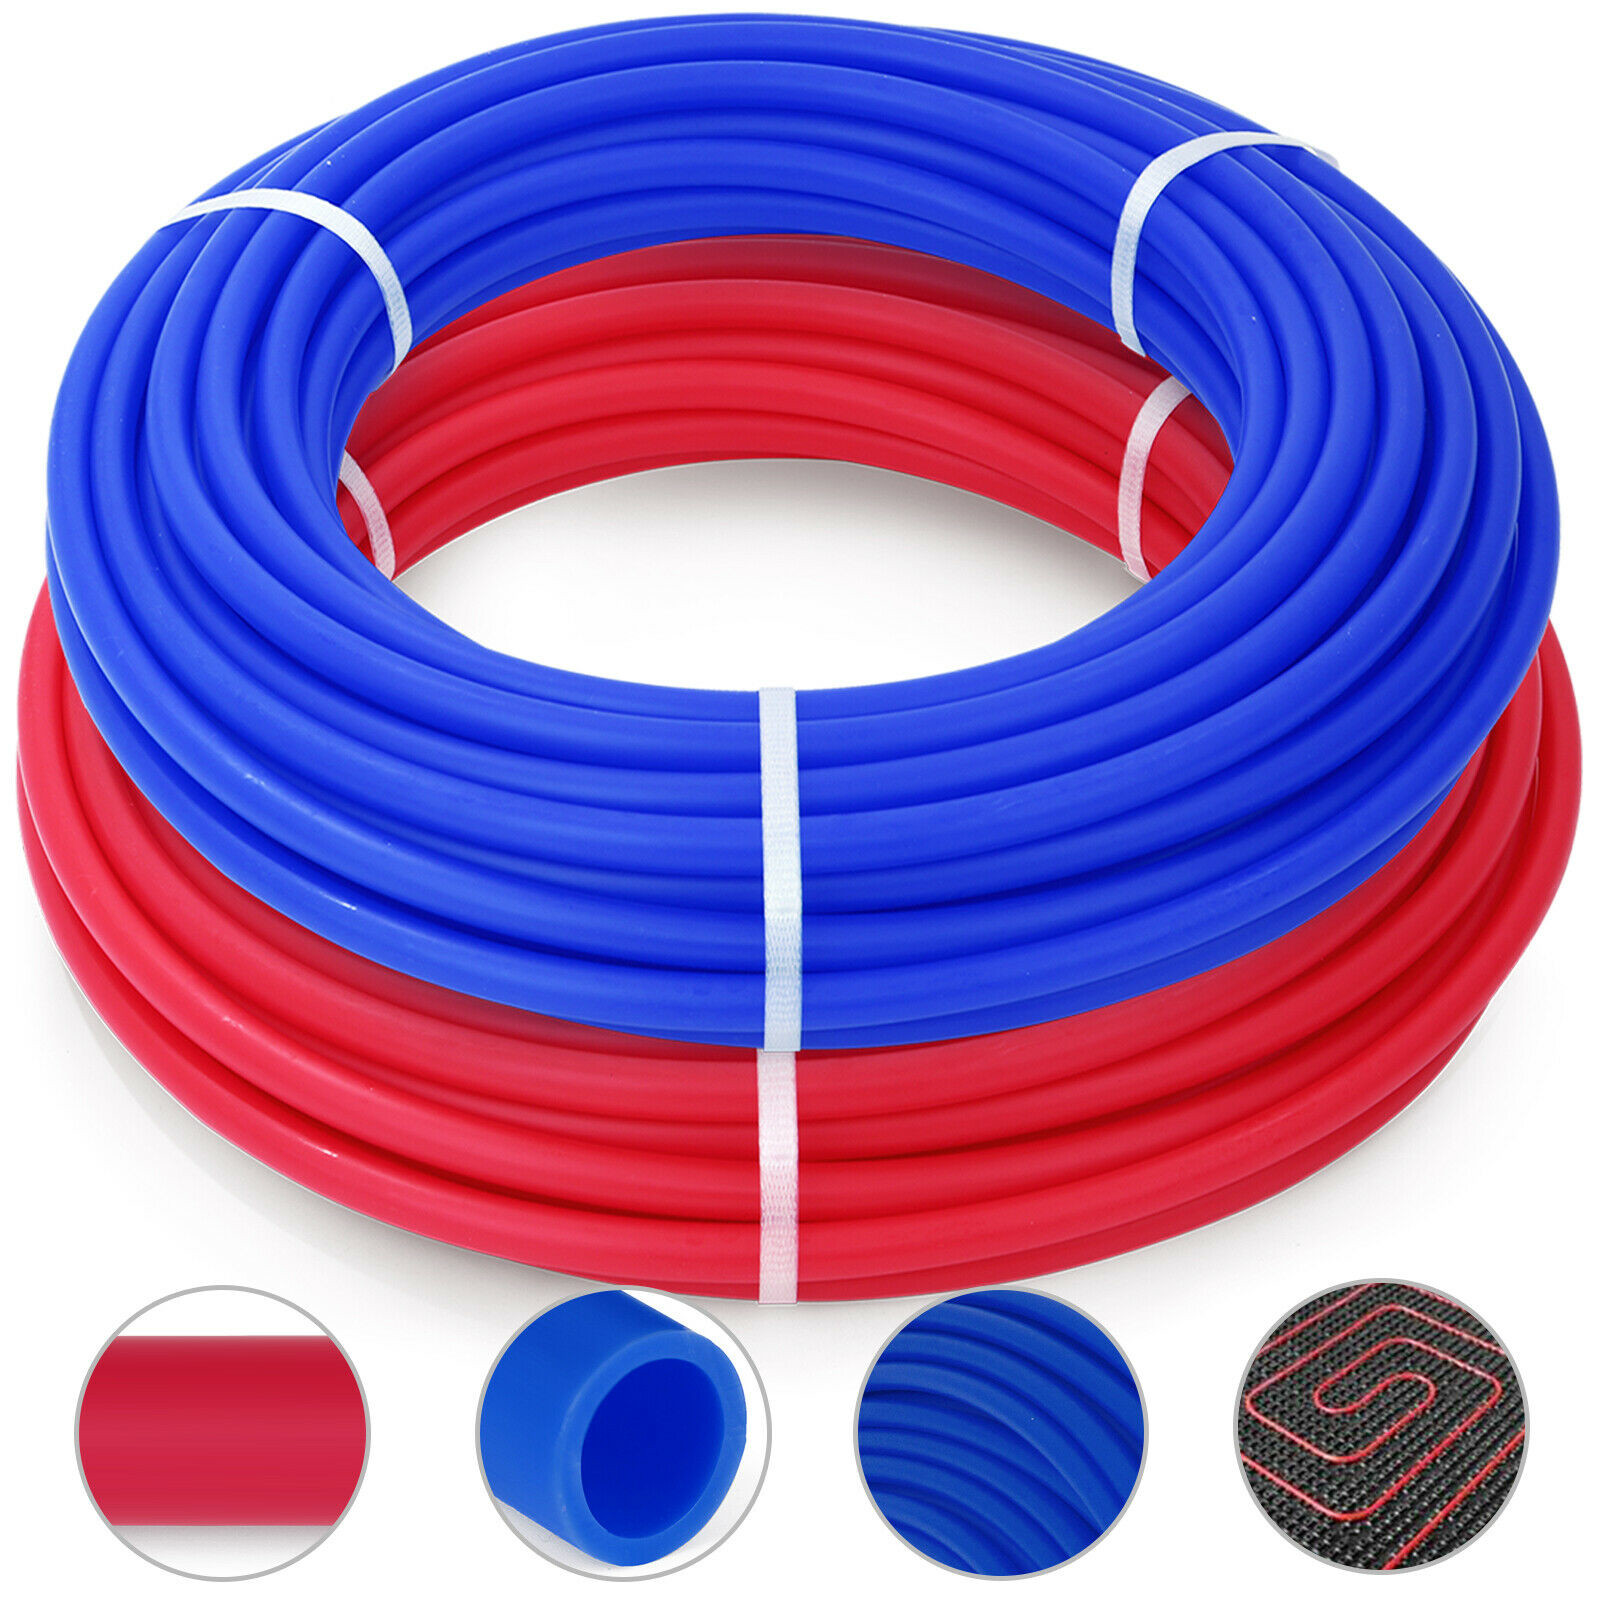 3/4" X 100 ft RED PEX TUBING FOR WATER SUPPLY WITH 25 YEARS WARRANTY